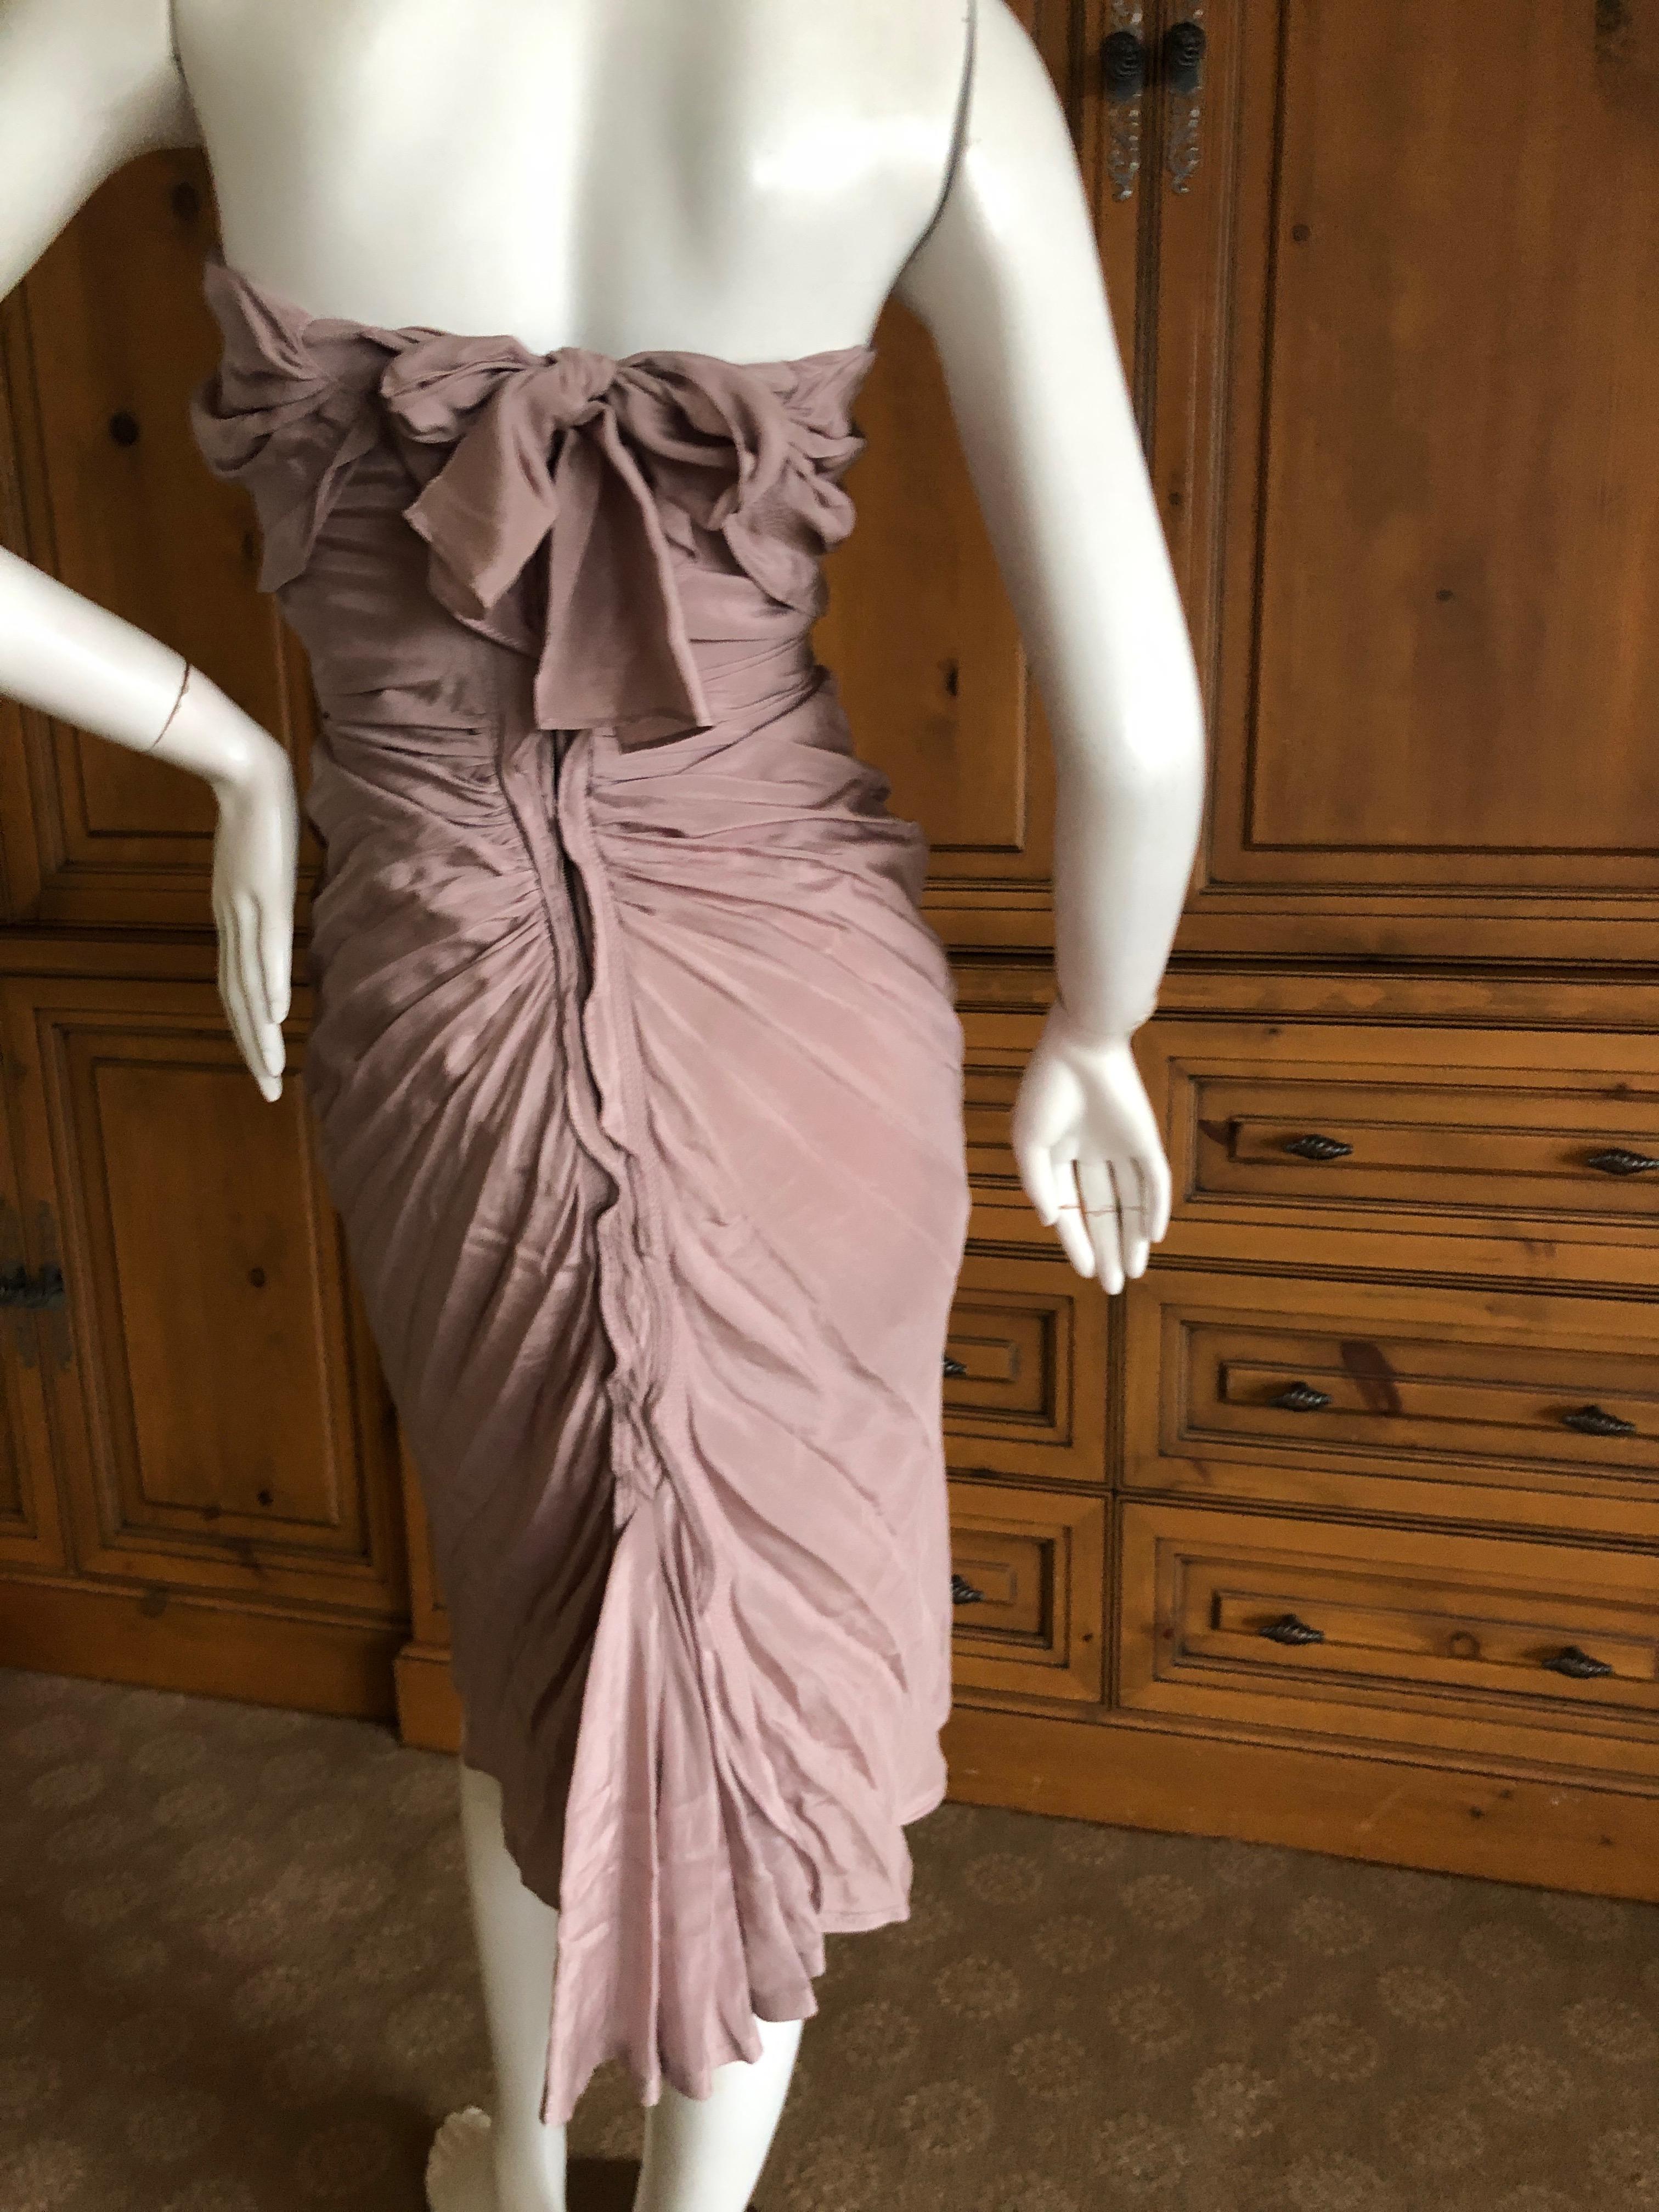 Yves Saint Laurent by Tom Ford 2003 Ruffled Strapless Mauve Silk  Dress  In Excellent Condition For Sale In Cloverdale, CA